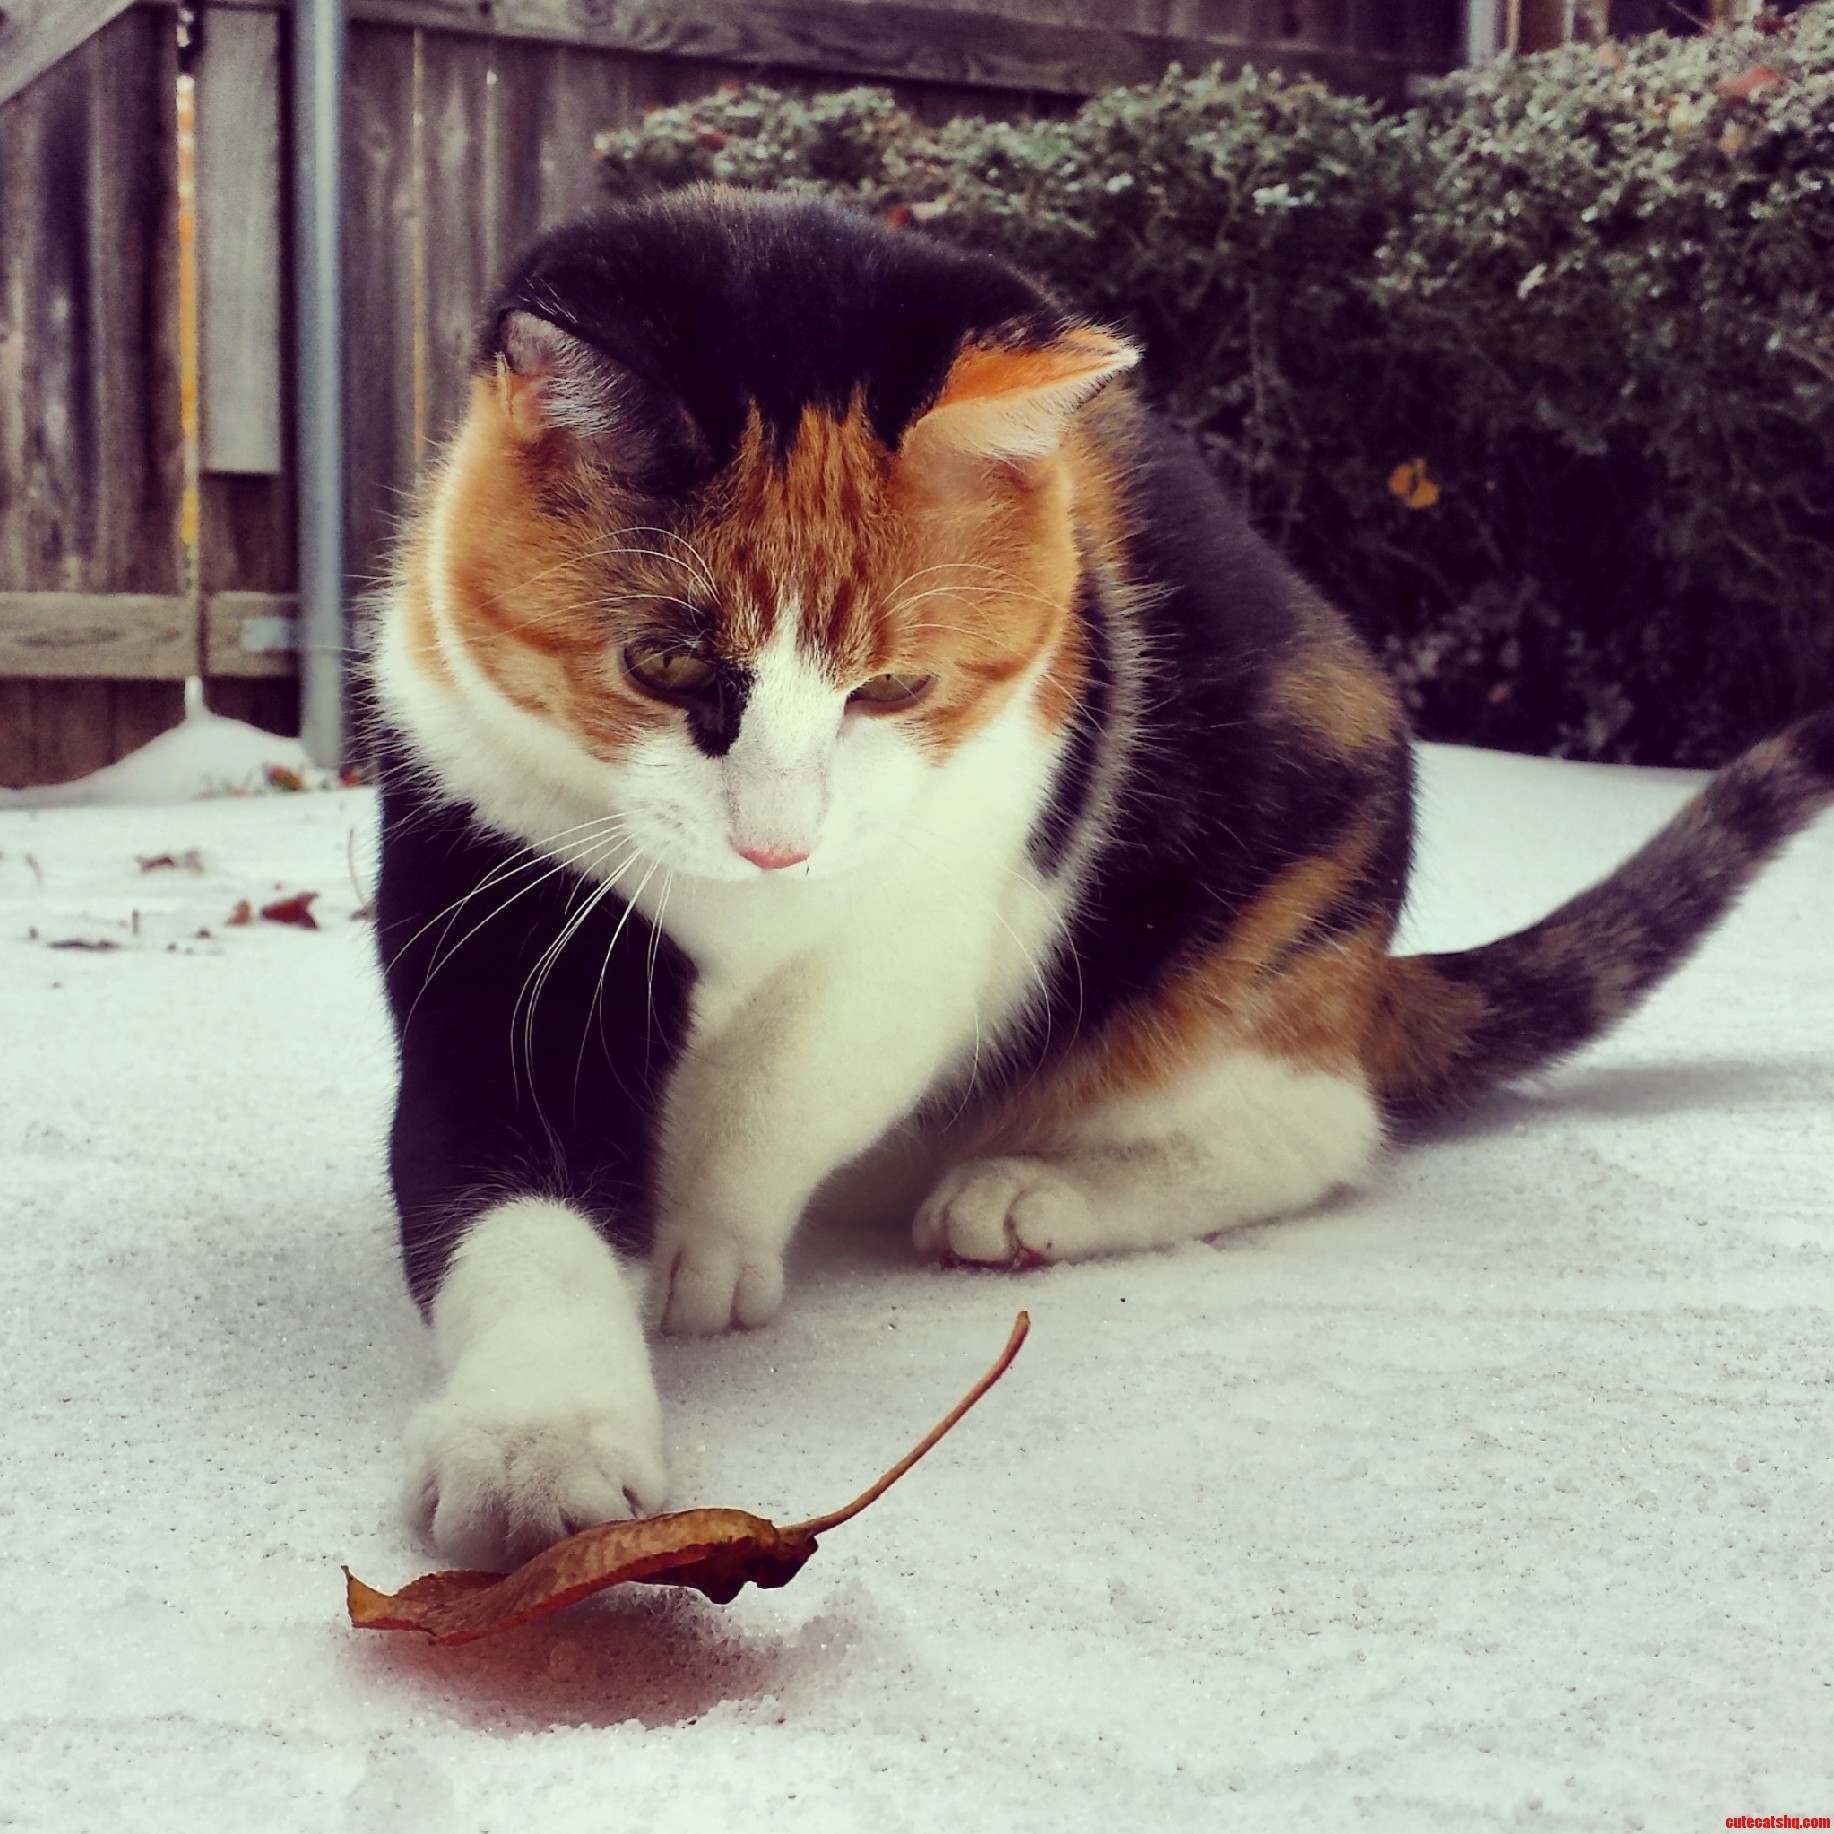 Jane Piddling With A Leaf In The Snow.